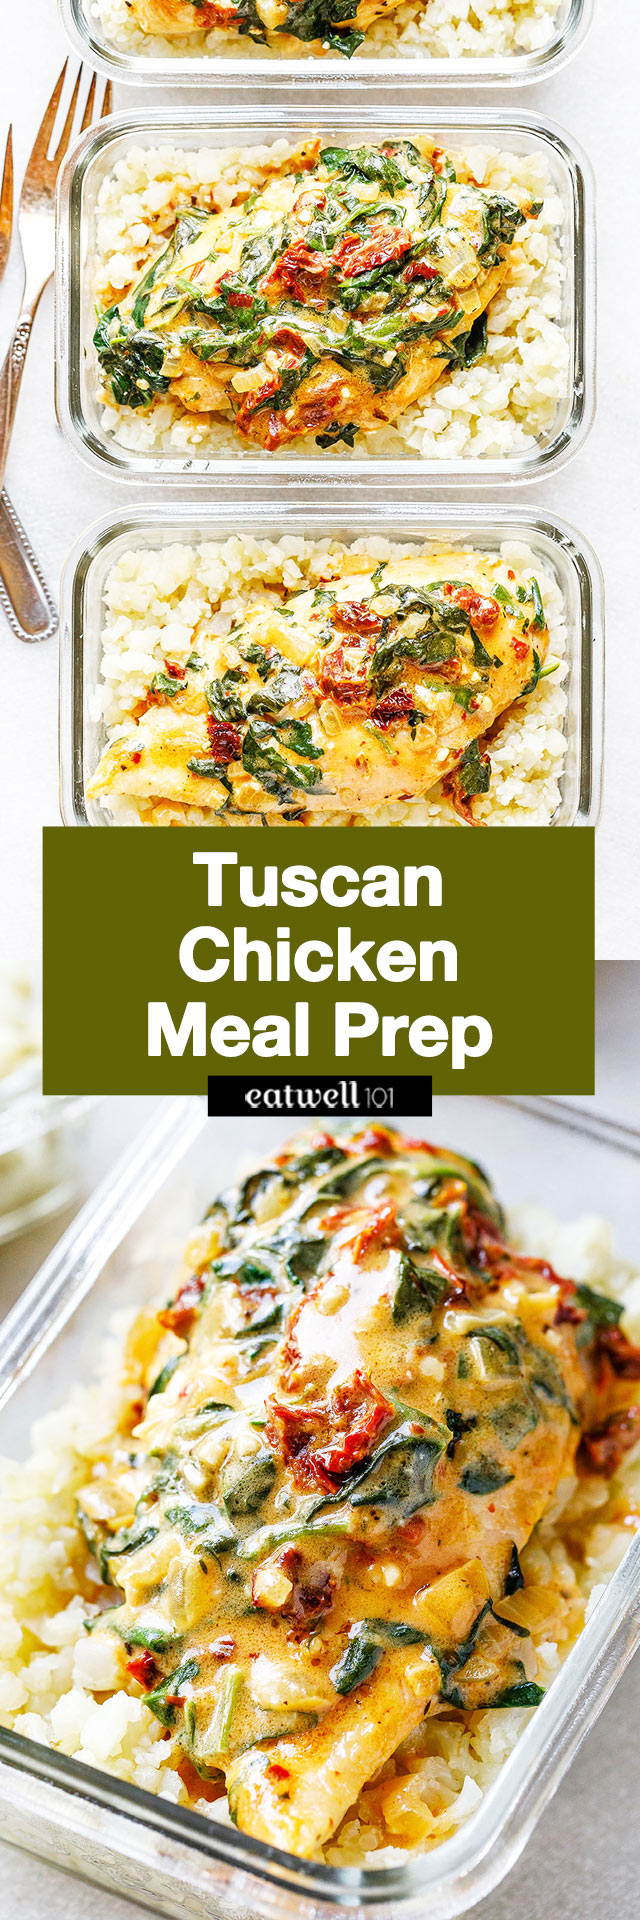 Creamy Tuscan Garlic Chicken Meal Prep - #chicken #mealprep #recipe #eatwell101 - This chicken meal prep recipe has the most amazing creamy garlic sauce with spinach and sun dried tomatoes.